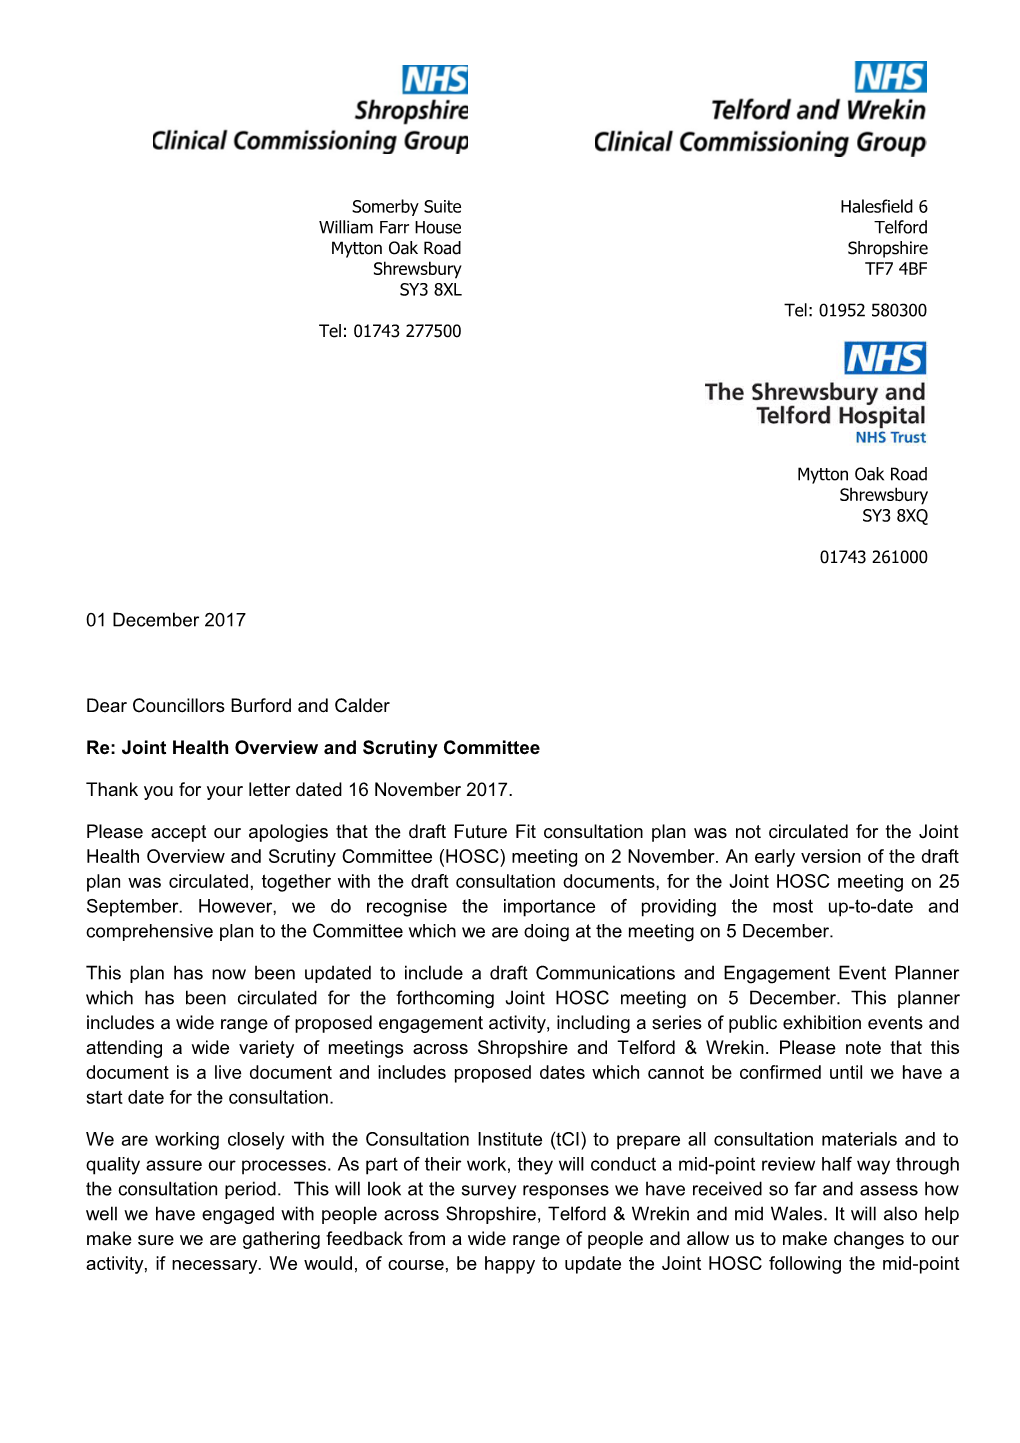 Re: Joint Health Overview and Scrutiny Committee